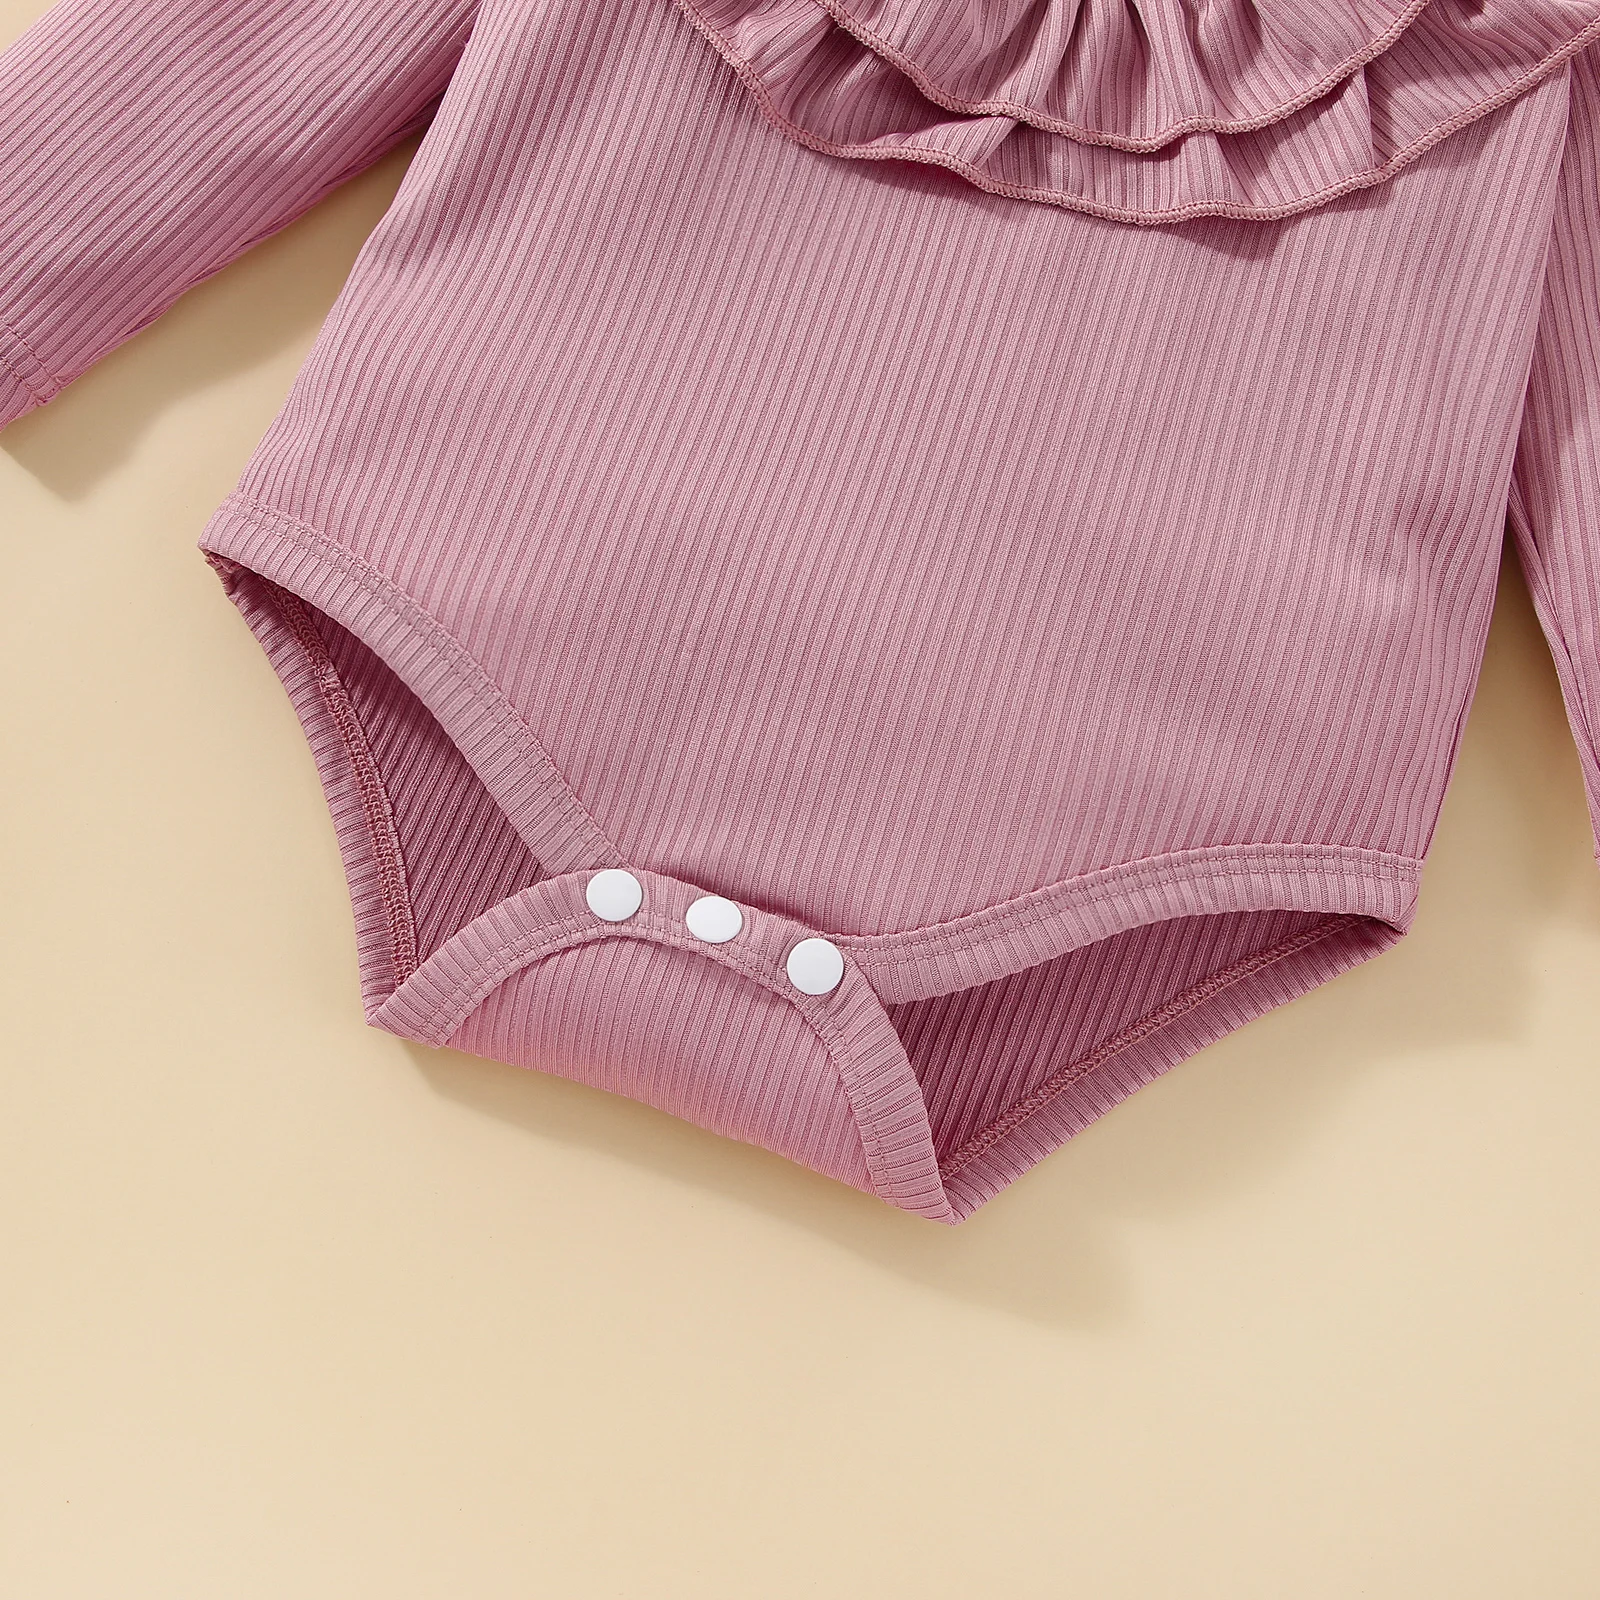 Ma&Baby 3-24M Newborn Infant Baby Girl Romper Knit Soft Long Sleeve Ruffle Jumpsuit Spring Autumn Toddler Girls Clothing D01